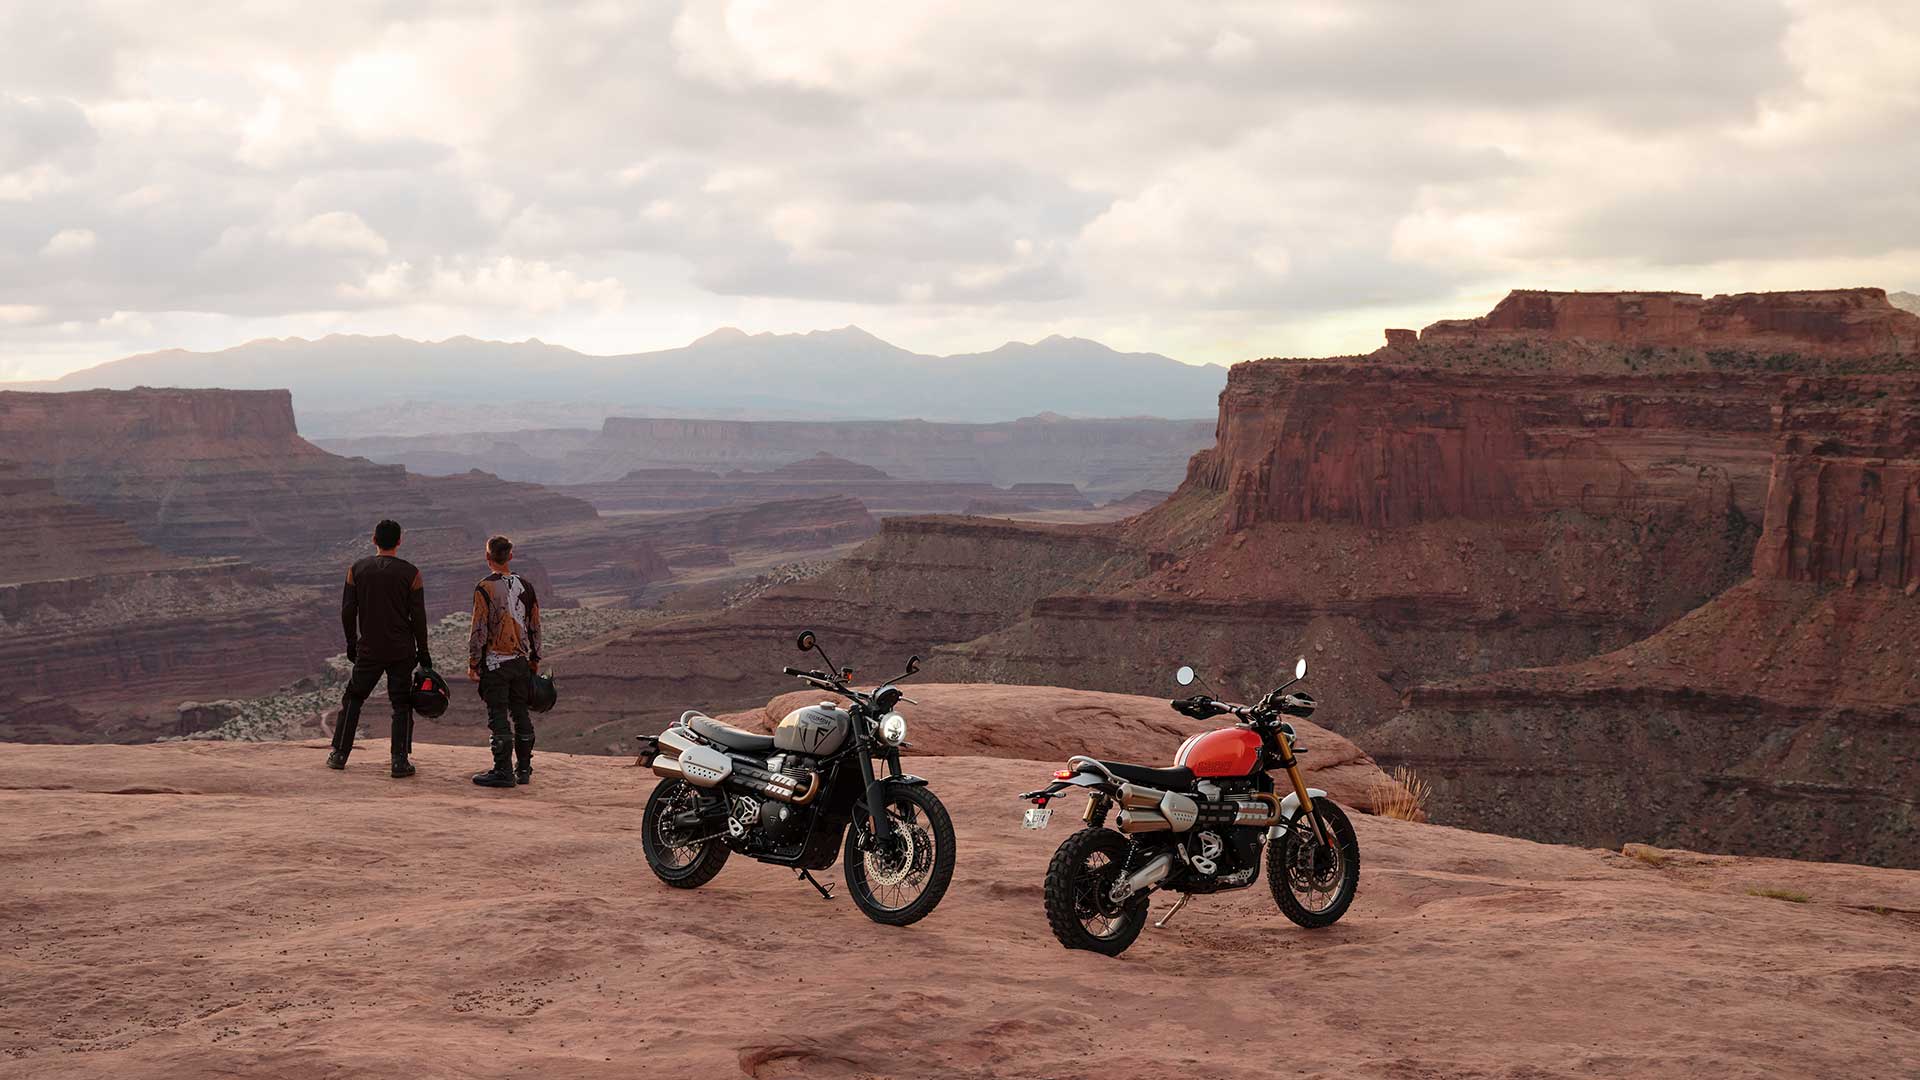 Triumph Scrambler 1200s Parked with Riders In Background